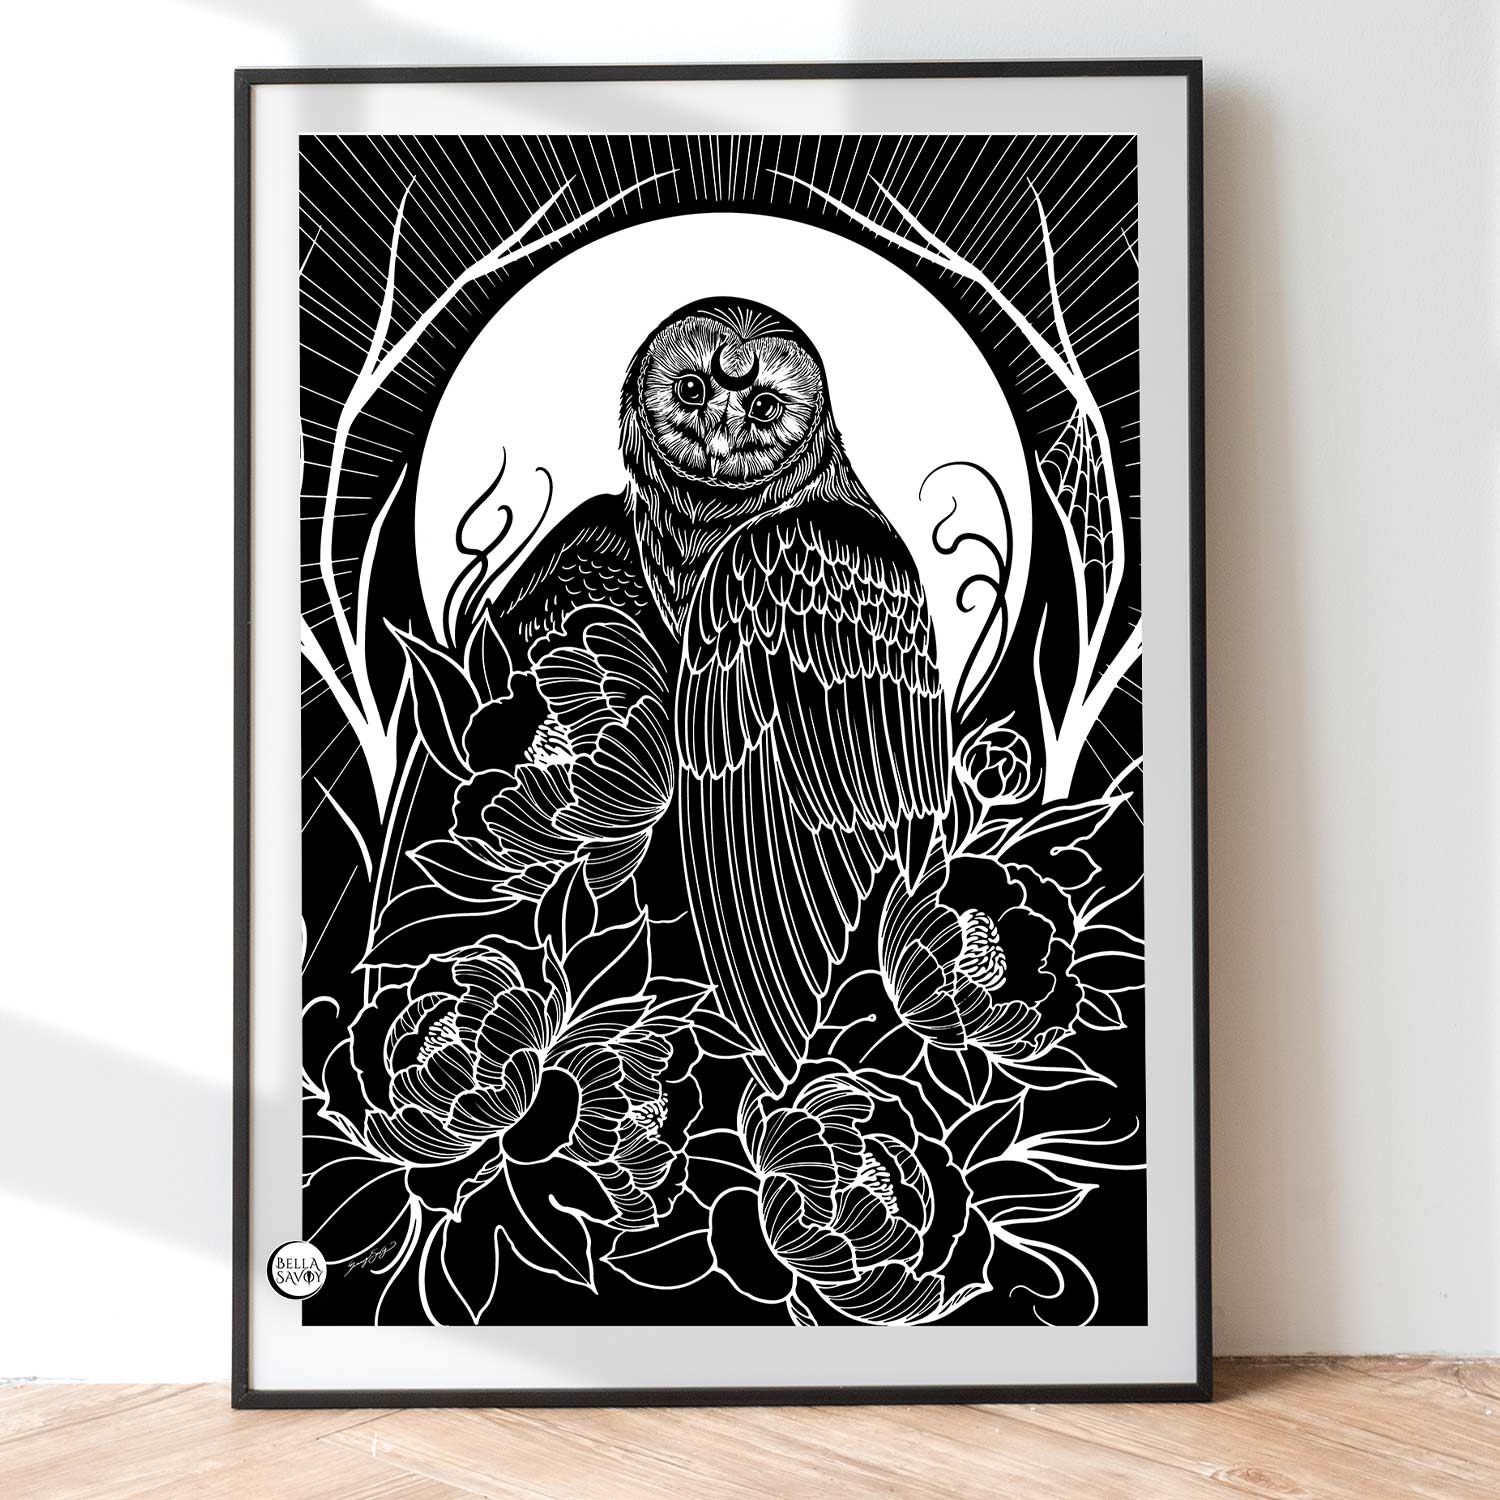 black and white owl and peonies in front of full moon and rays. Linocut print aesthetic. 